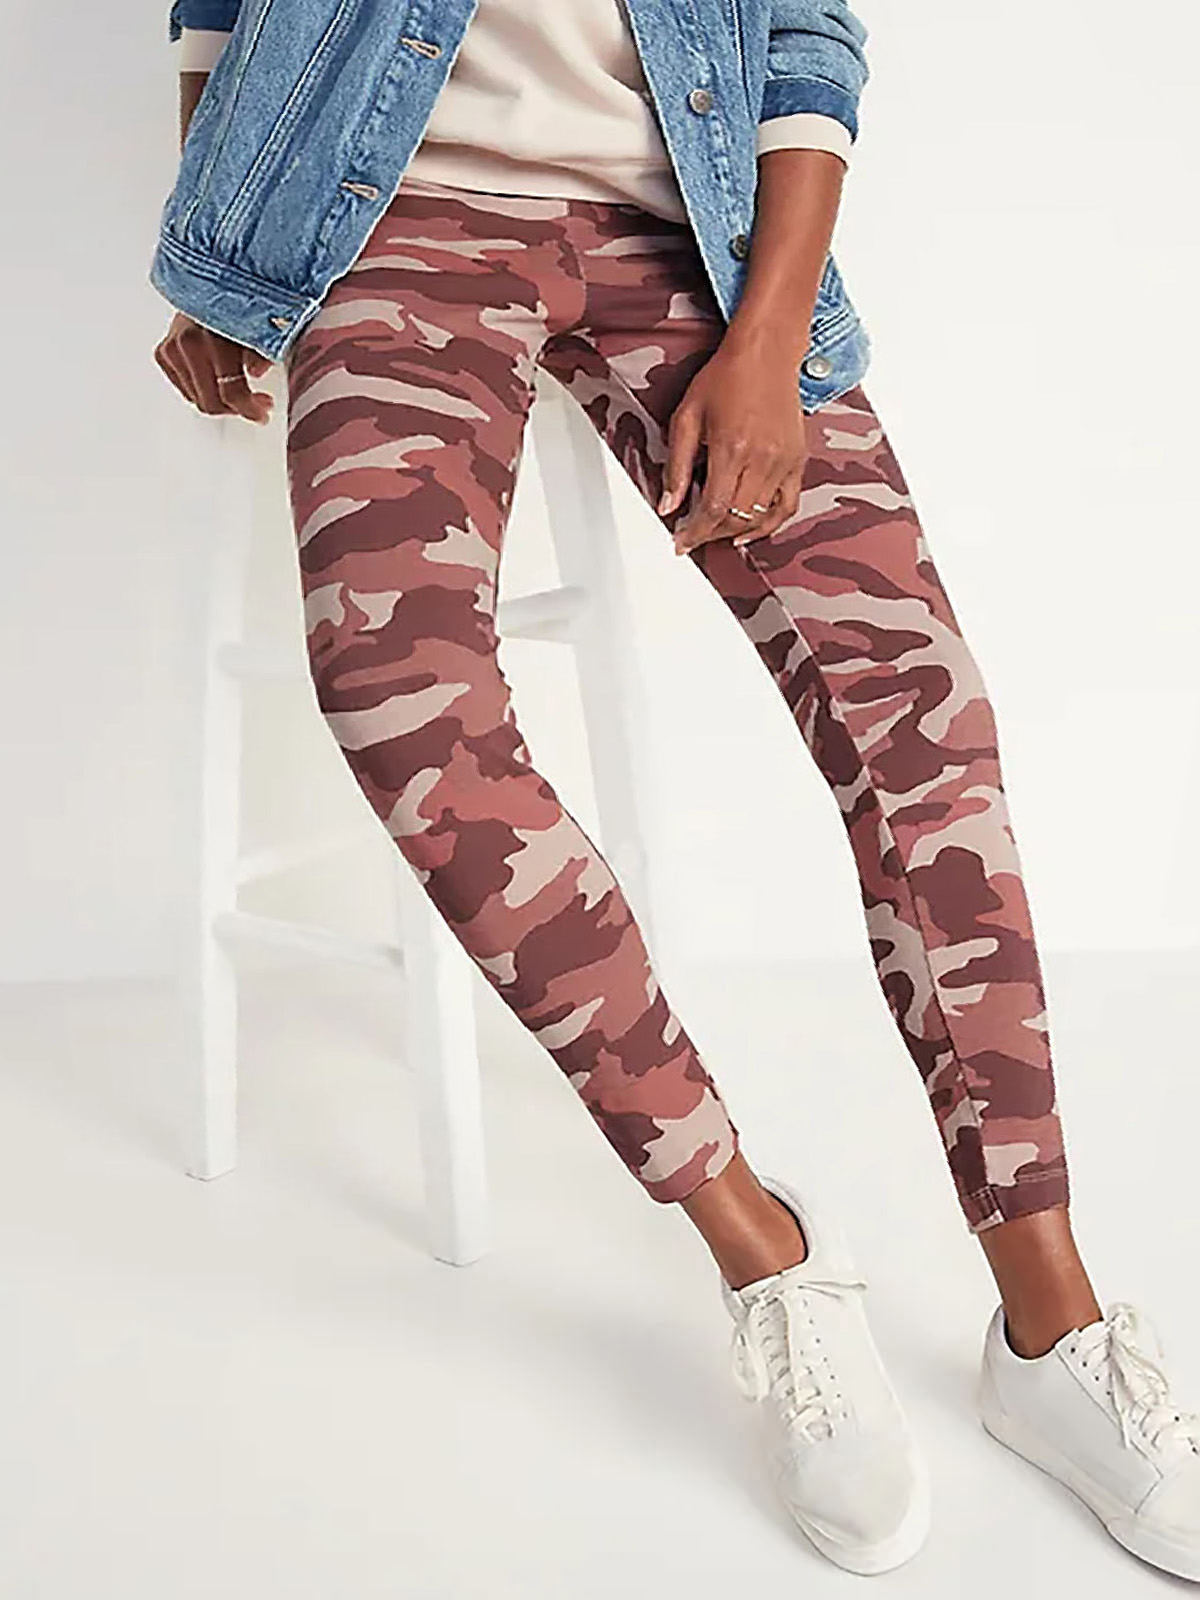 Old Navy - - Old Navy PINK CAMO Print High-Waisted Leggings - Size 6/8 to  22 (S to XXL)